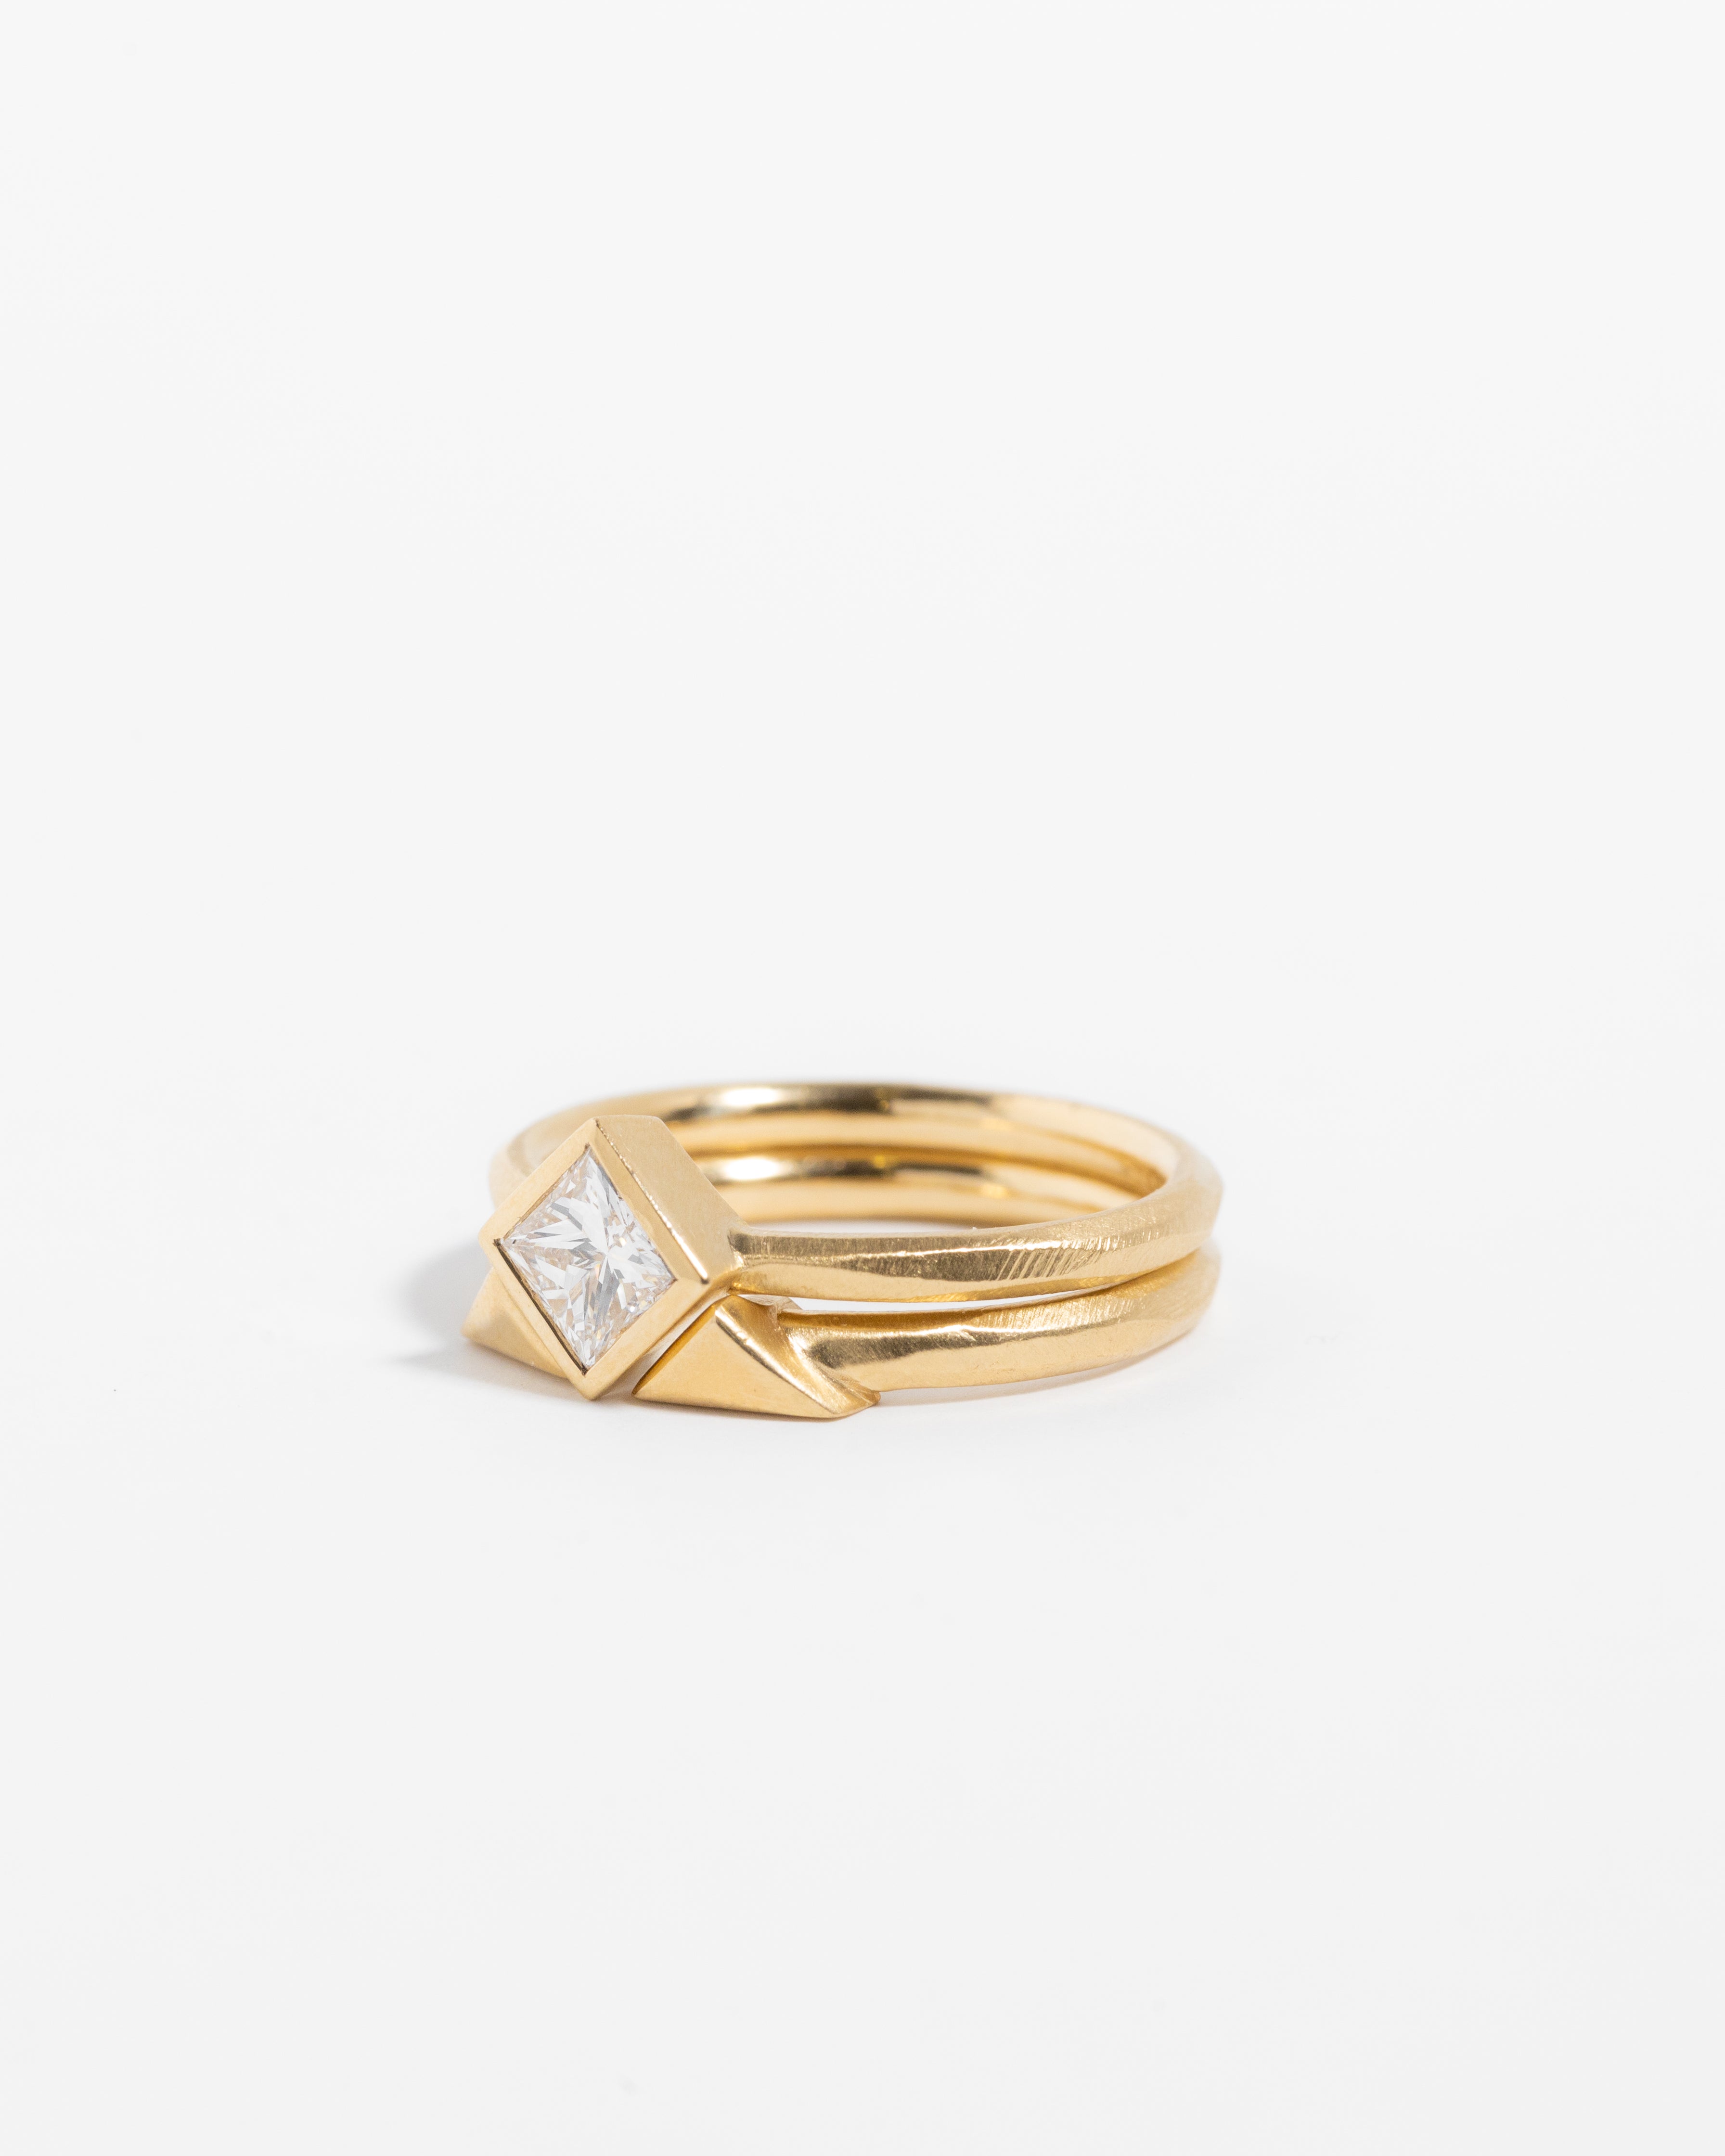 Princess cut diamond ring with pyramid spacer ring set in solid 14k gold